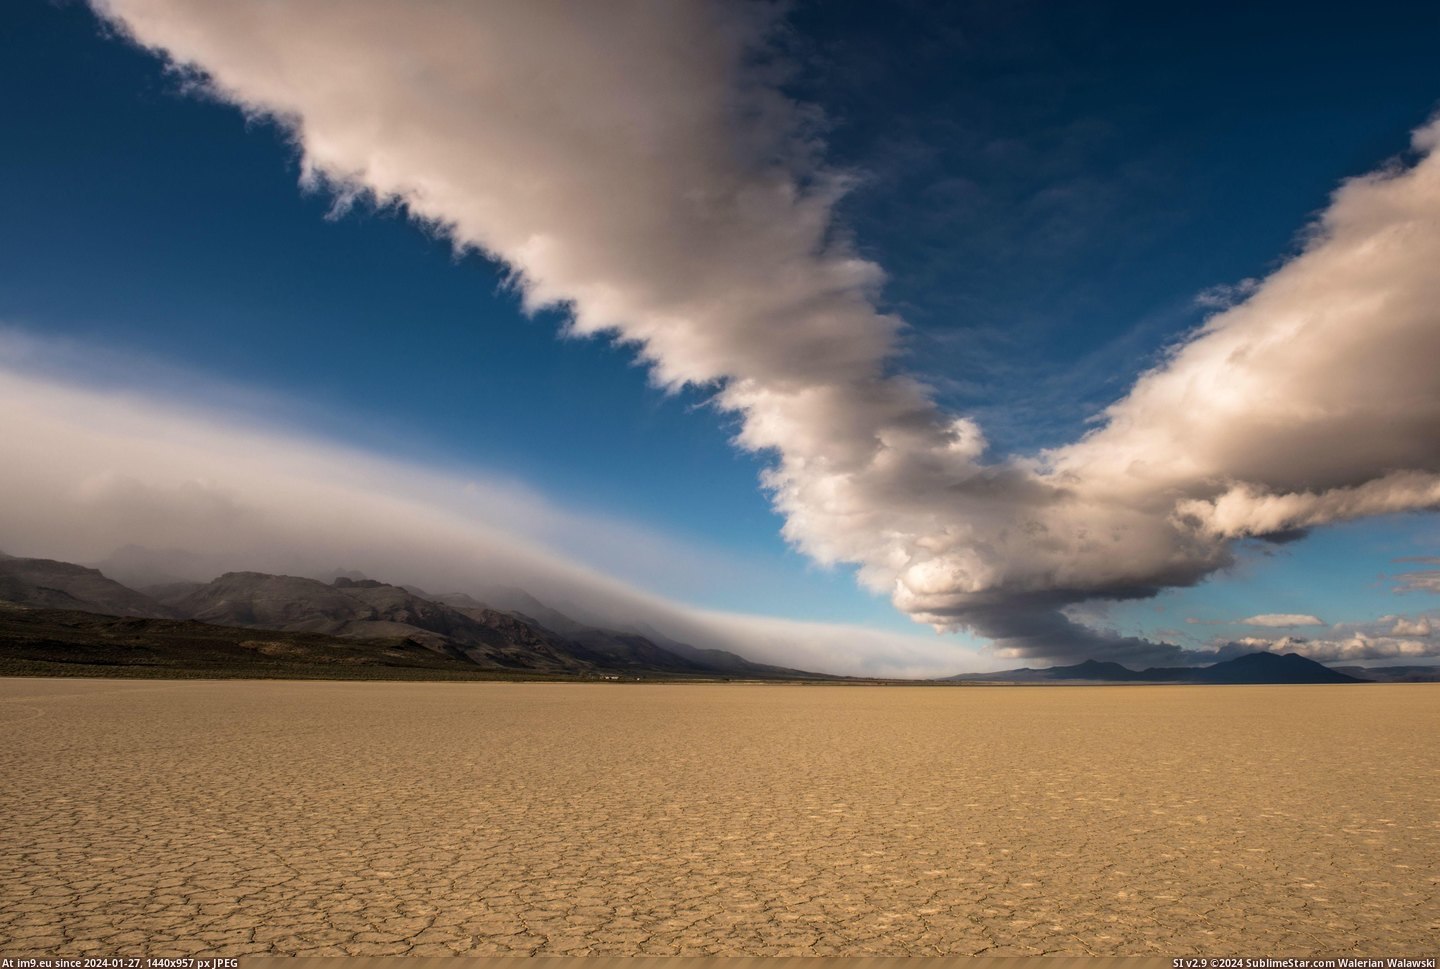 #Massive #Sky #Desert #Carried #Wind #Tunnels #Clouds #Incredible #Shape [Earthporn] Massive wind tunnels carried these clouds in an incredible 'V' shape through the sky in the Alvord Desert, OR  [4416 Pic. (Изображение из альбом My r/EARTHPORN favs))